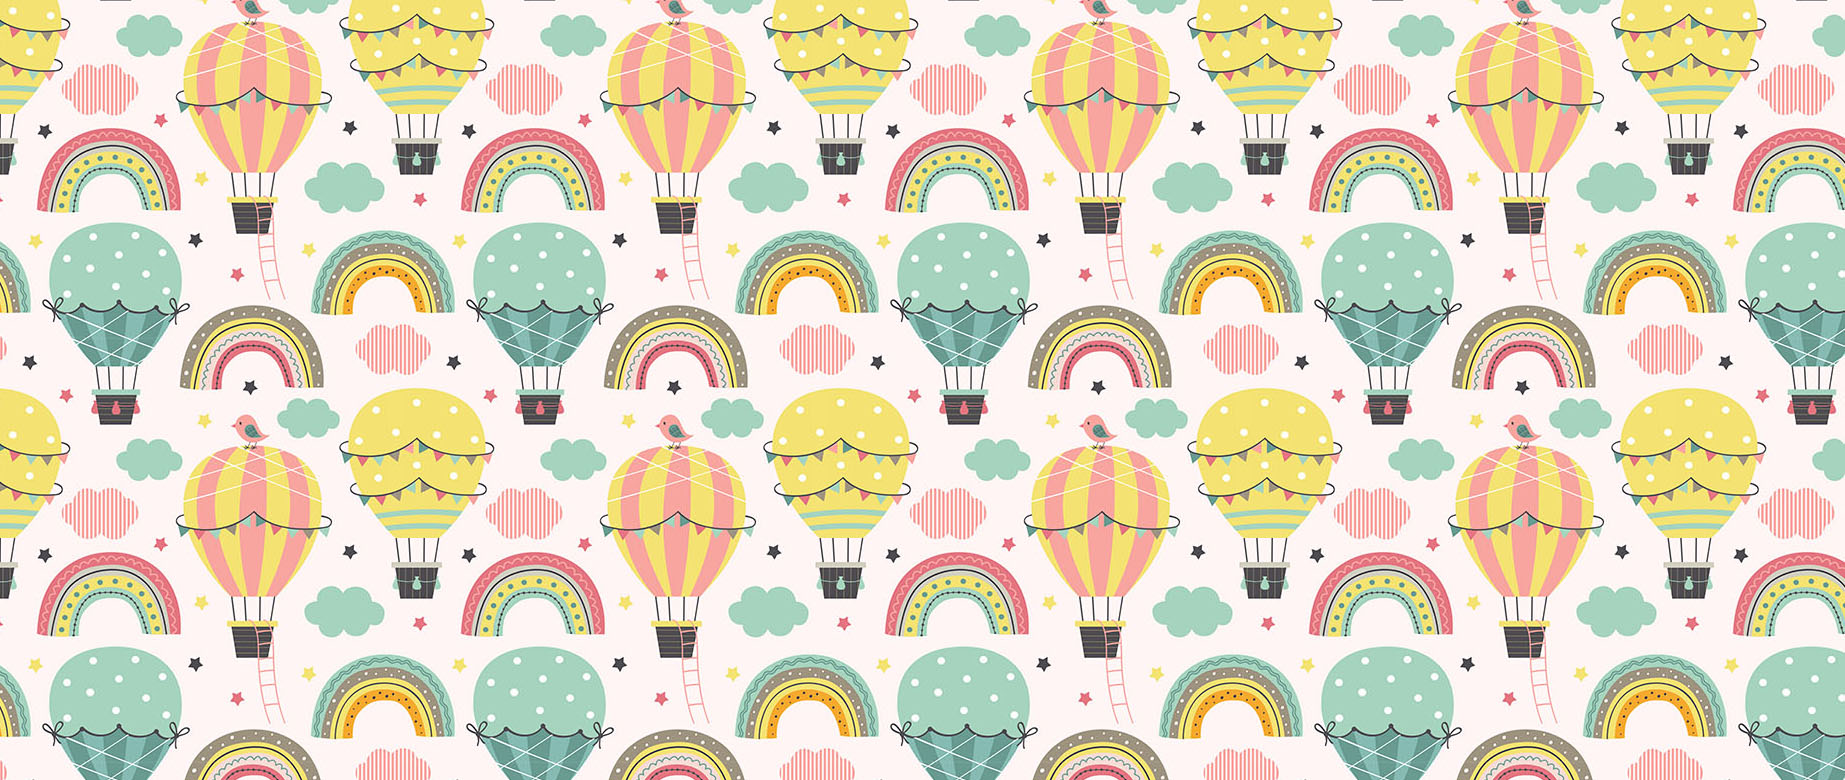 parachute-rainbow-clouds-and-stars-kids-wallpaper-seamless-repeat-view